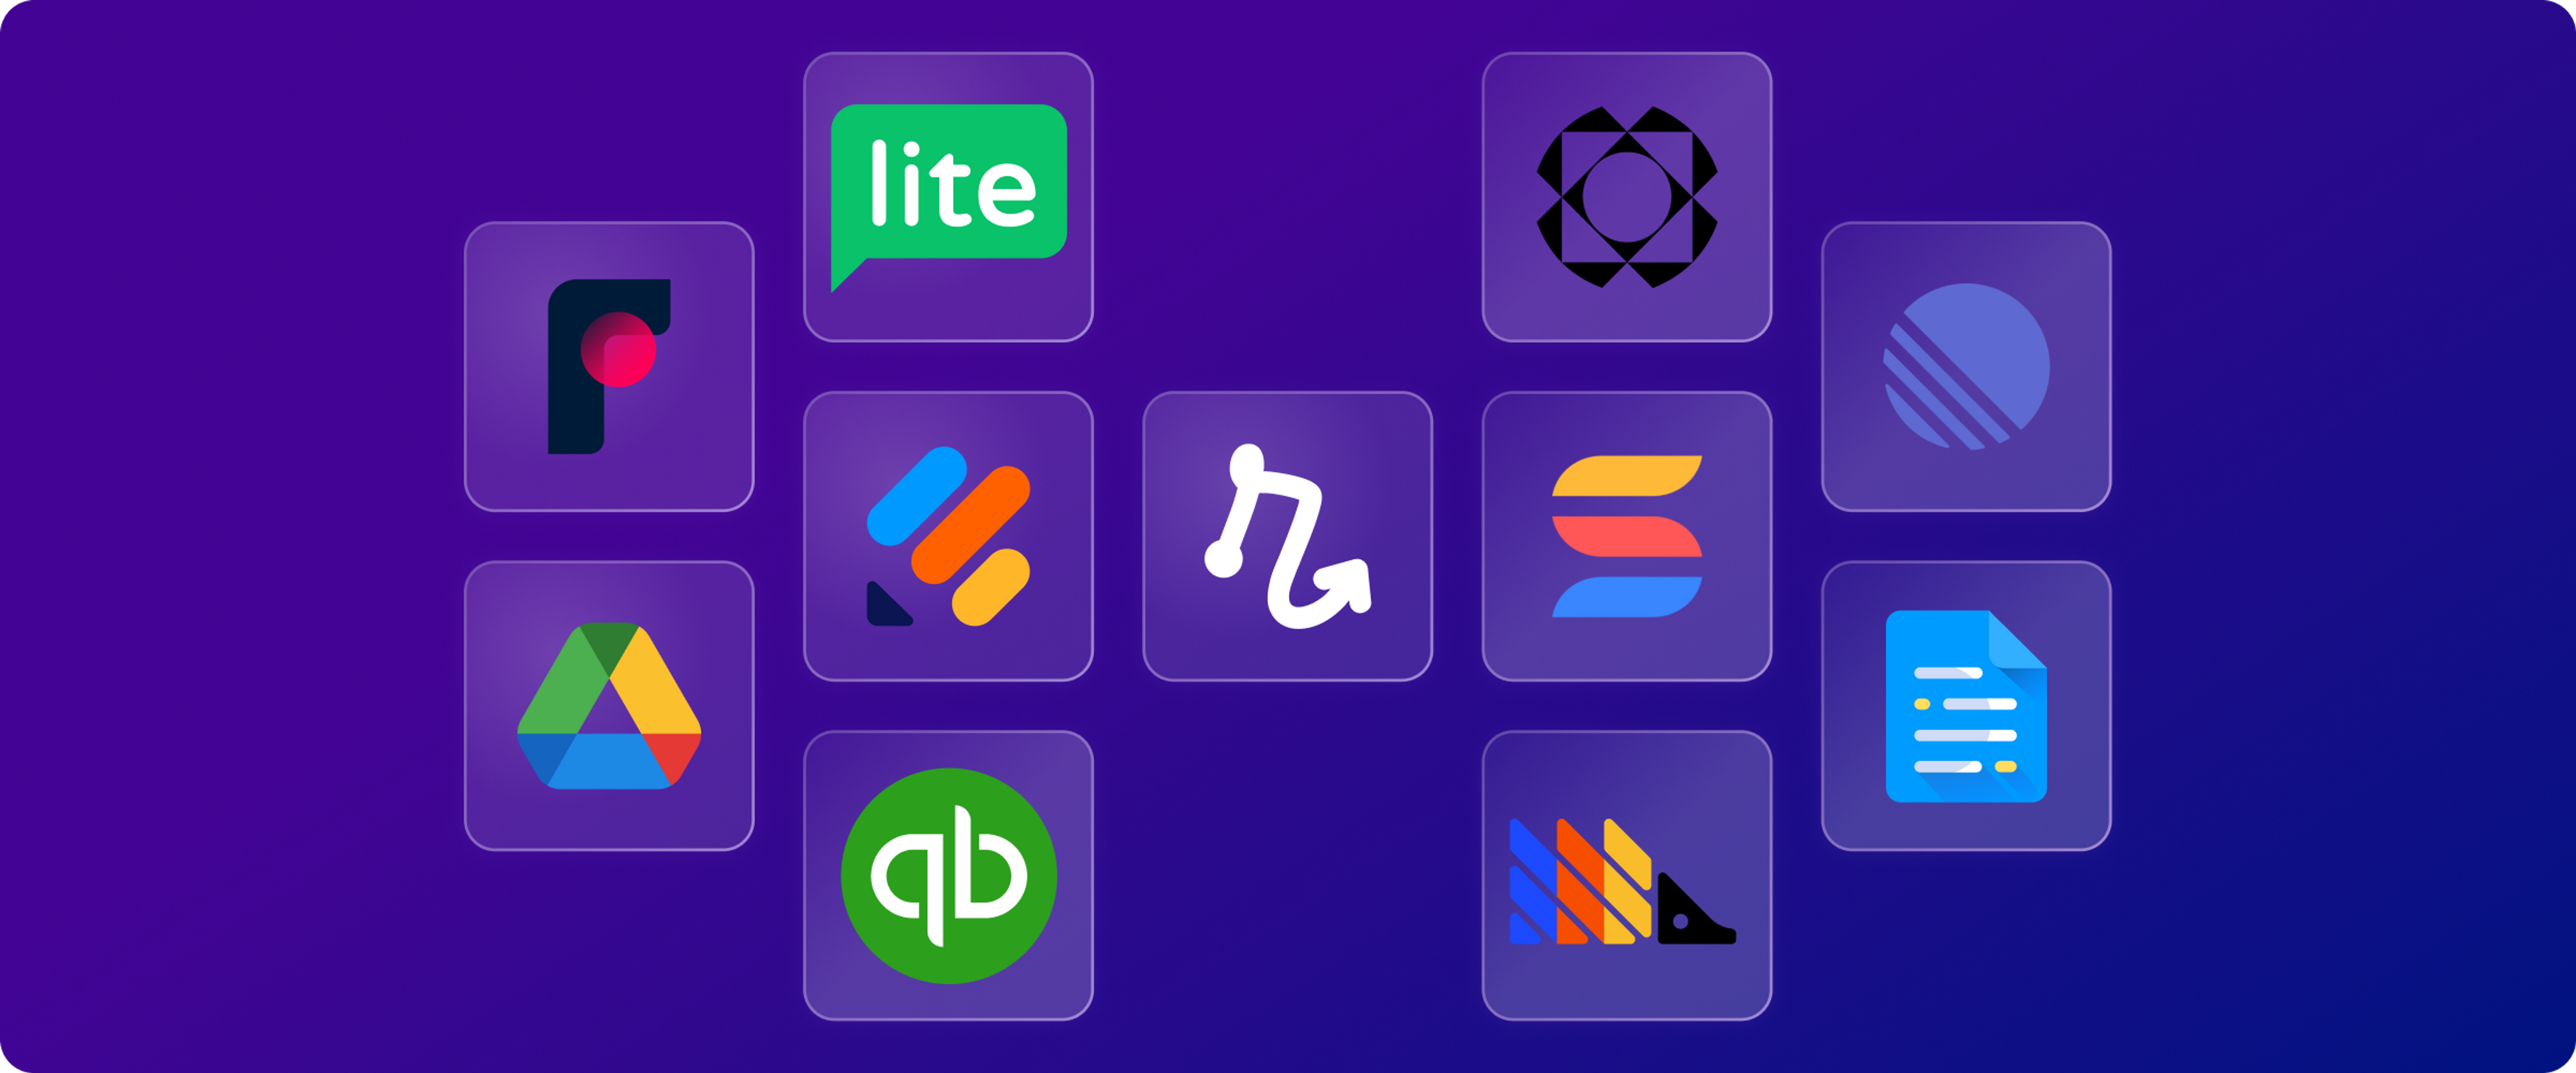 Logos of apps with new Relay.app integrations